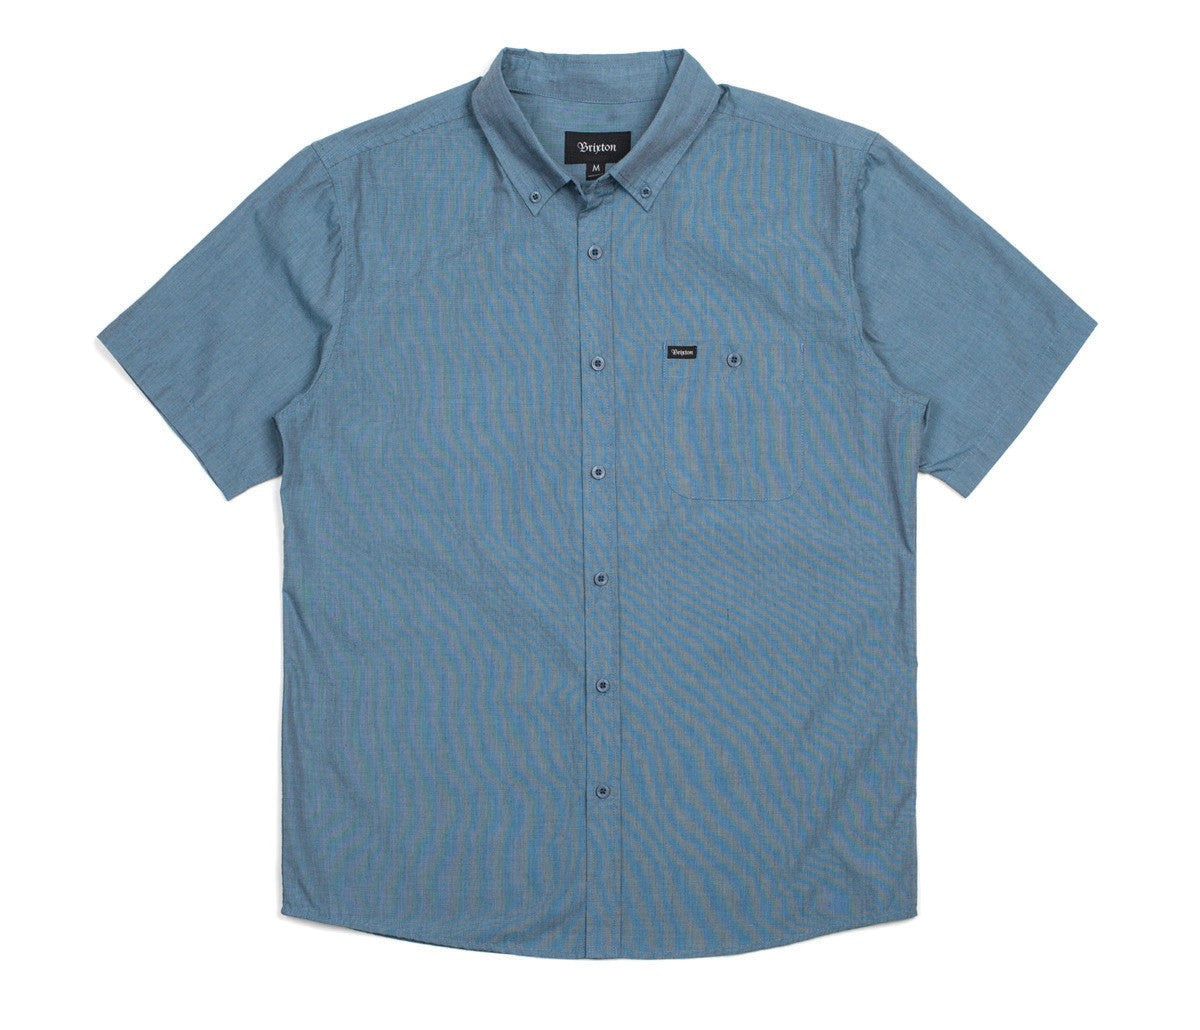 Brixton - Central Men's S/S Woven Shirt, Heather Steel - The Giant Peach